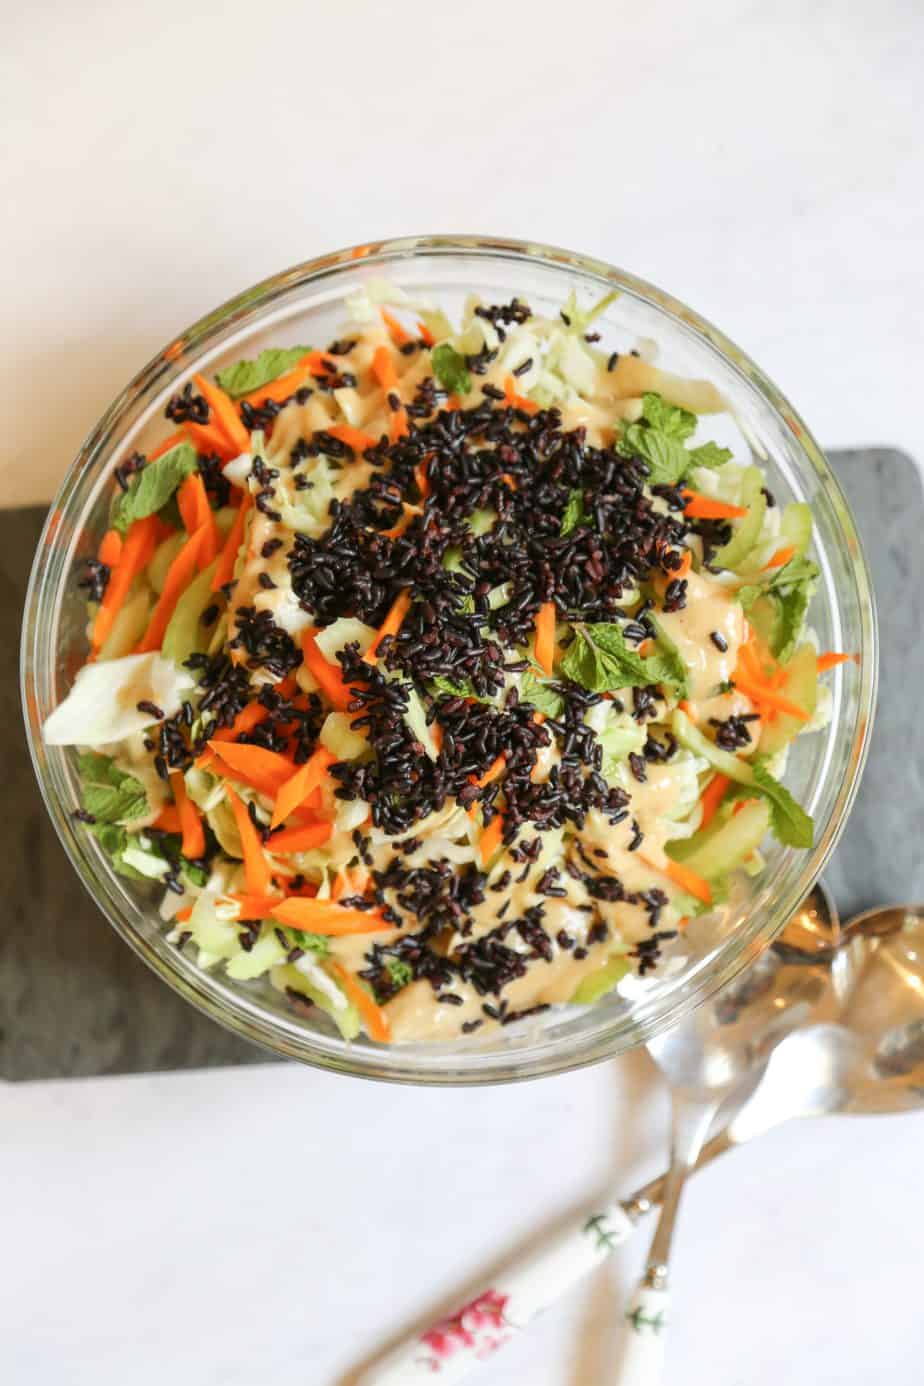 accompaniment salad with cabbage black rice sesame seeds carrots mint and ginger miso dressing in a glass serving bowl on a cutting board with serving spoons 